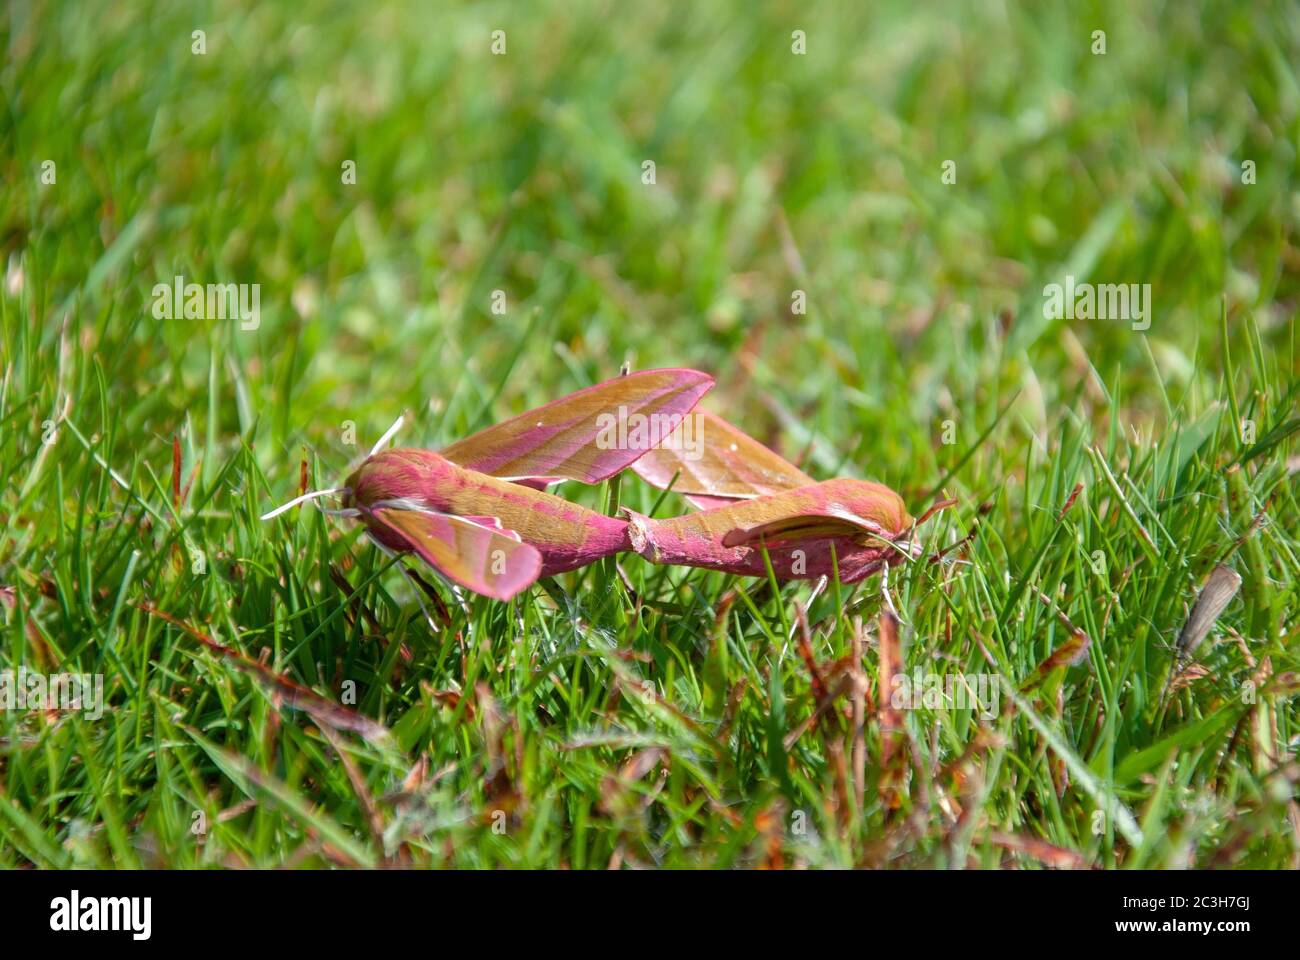 Two Elephant Hawk Moths Mating on the Grass close up shallow depth of field eye level landscape view of a pair couple duo pink green colour elephant h Stock Photo